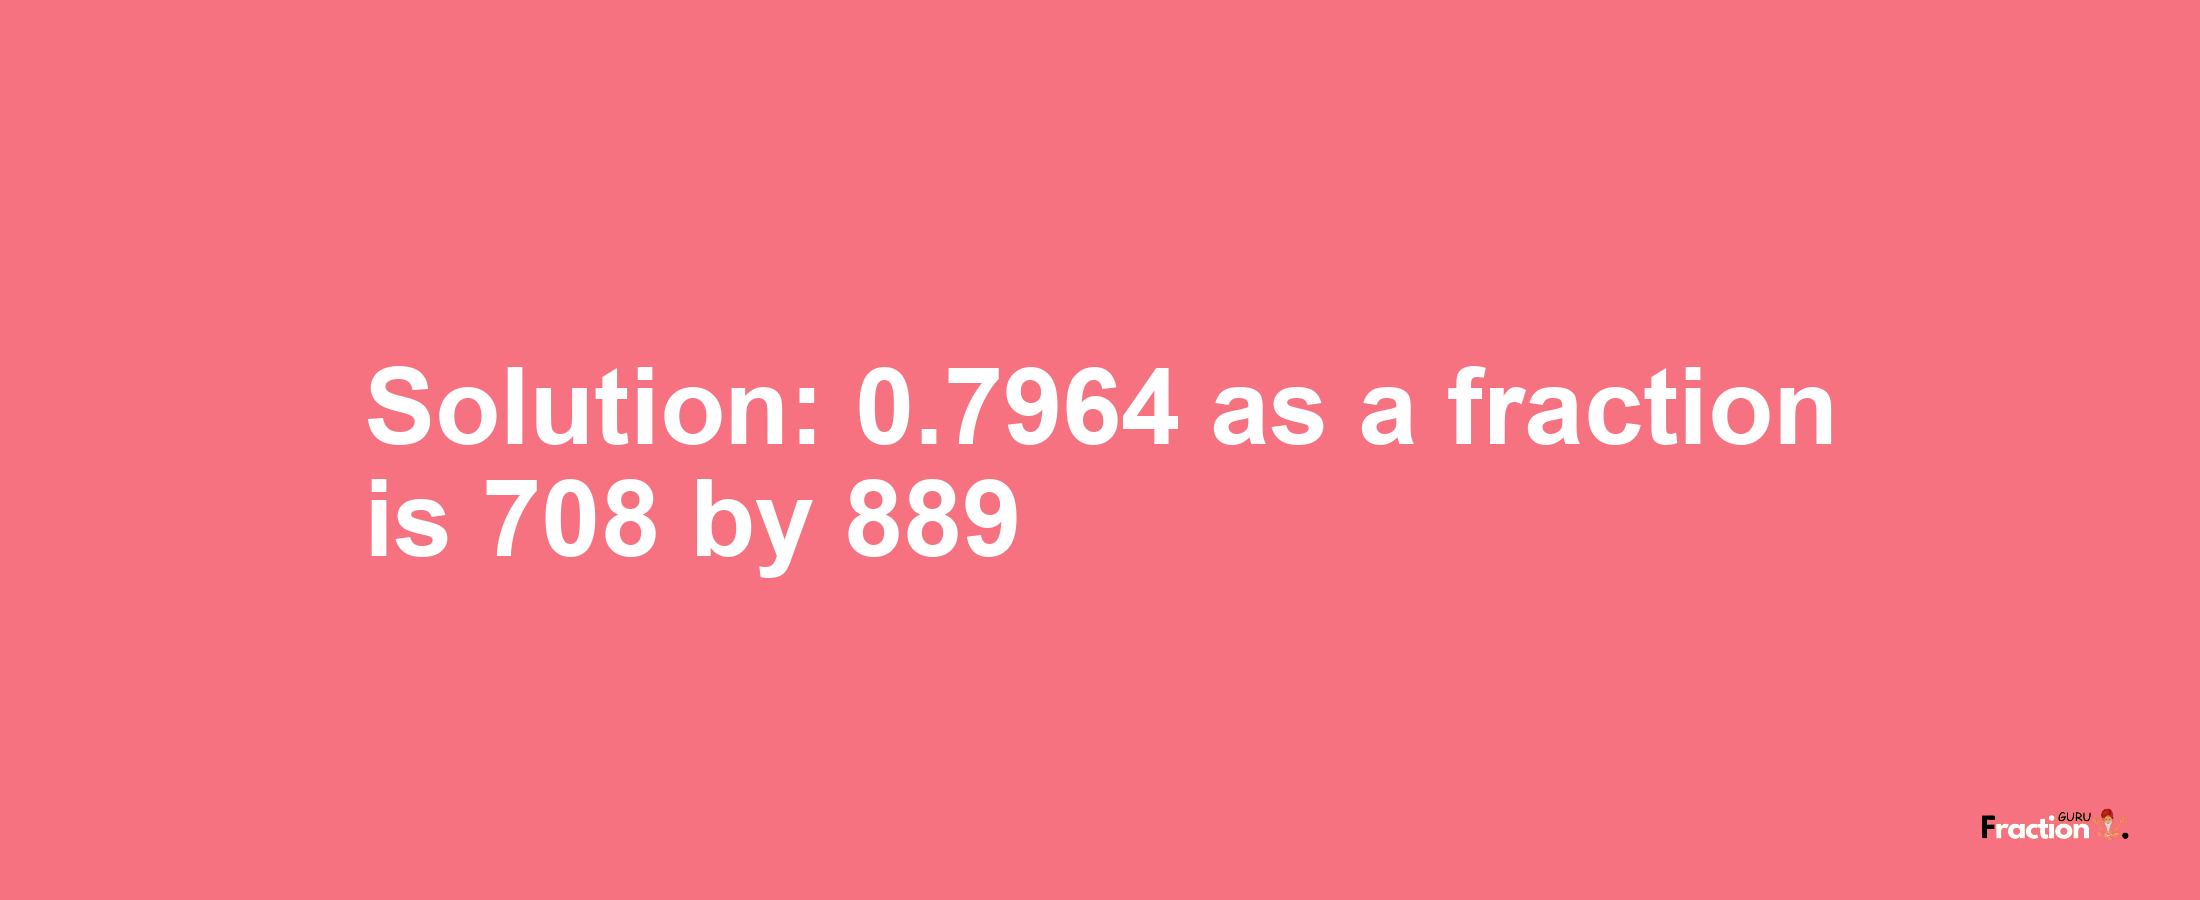 Solution:0.7964 as a fraction is 708/889